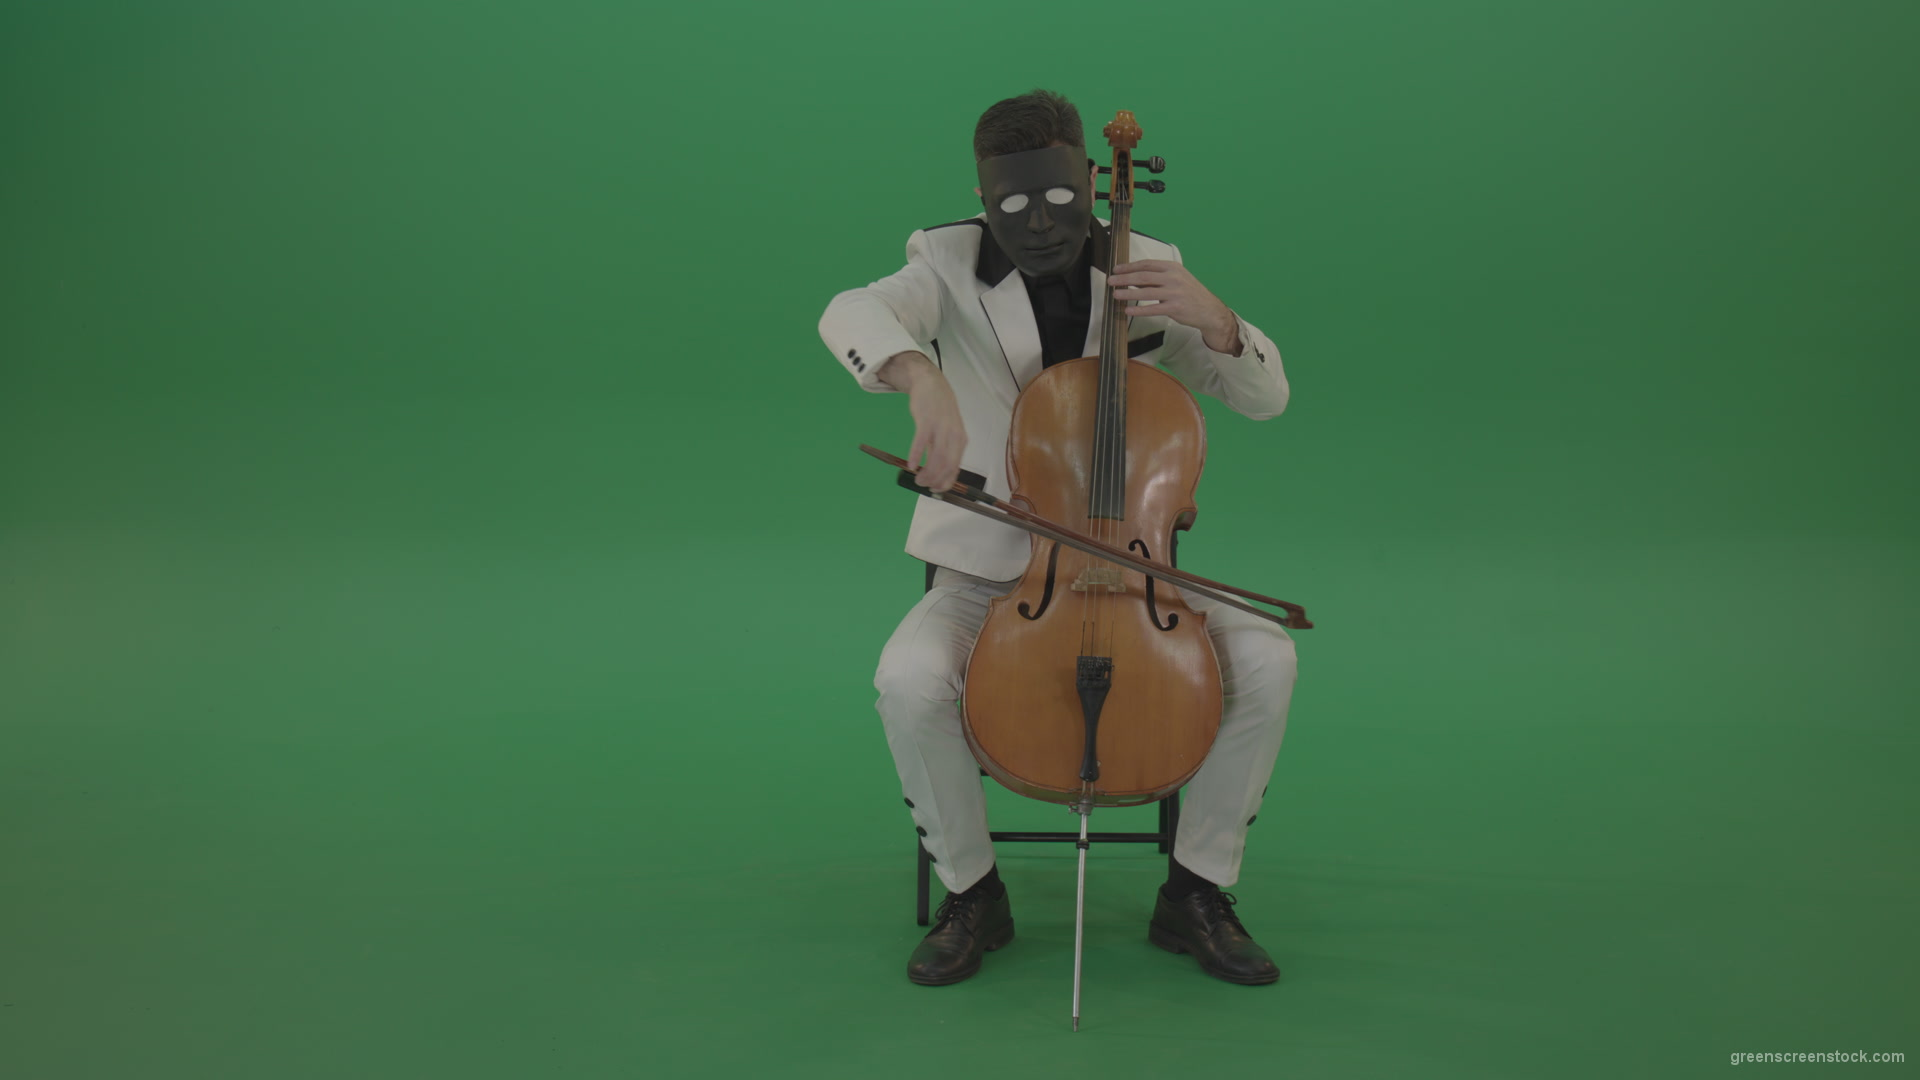 Man-plays-on-a-cello-in-a-white-suit-and-a-black-mask-with-white-eyes_007 Green Screen Stock